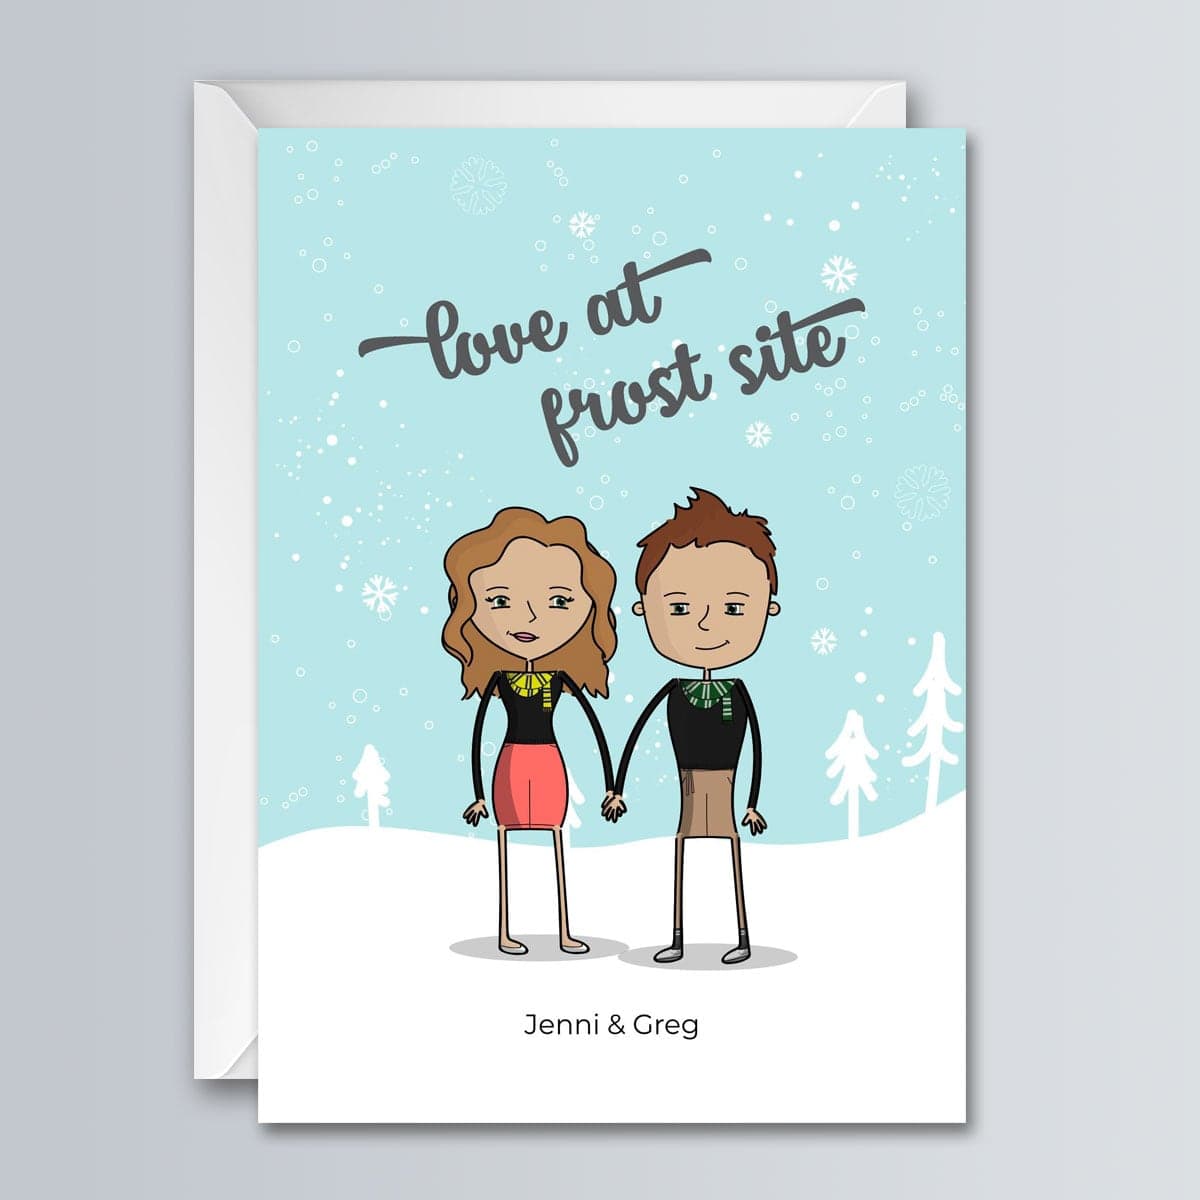 Love at Frost Site - Greeting Card